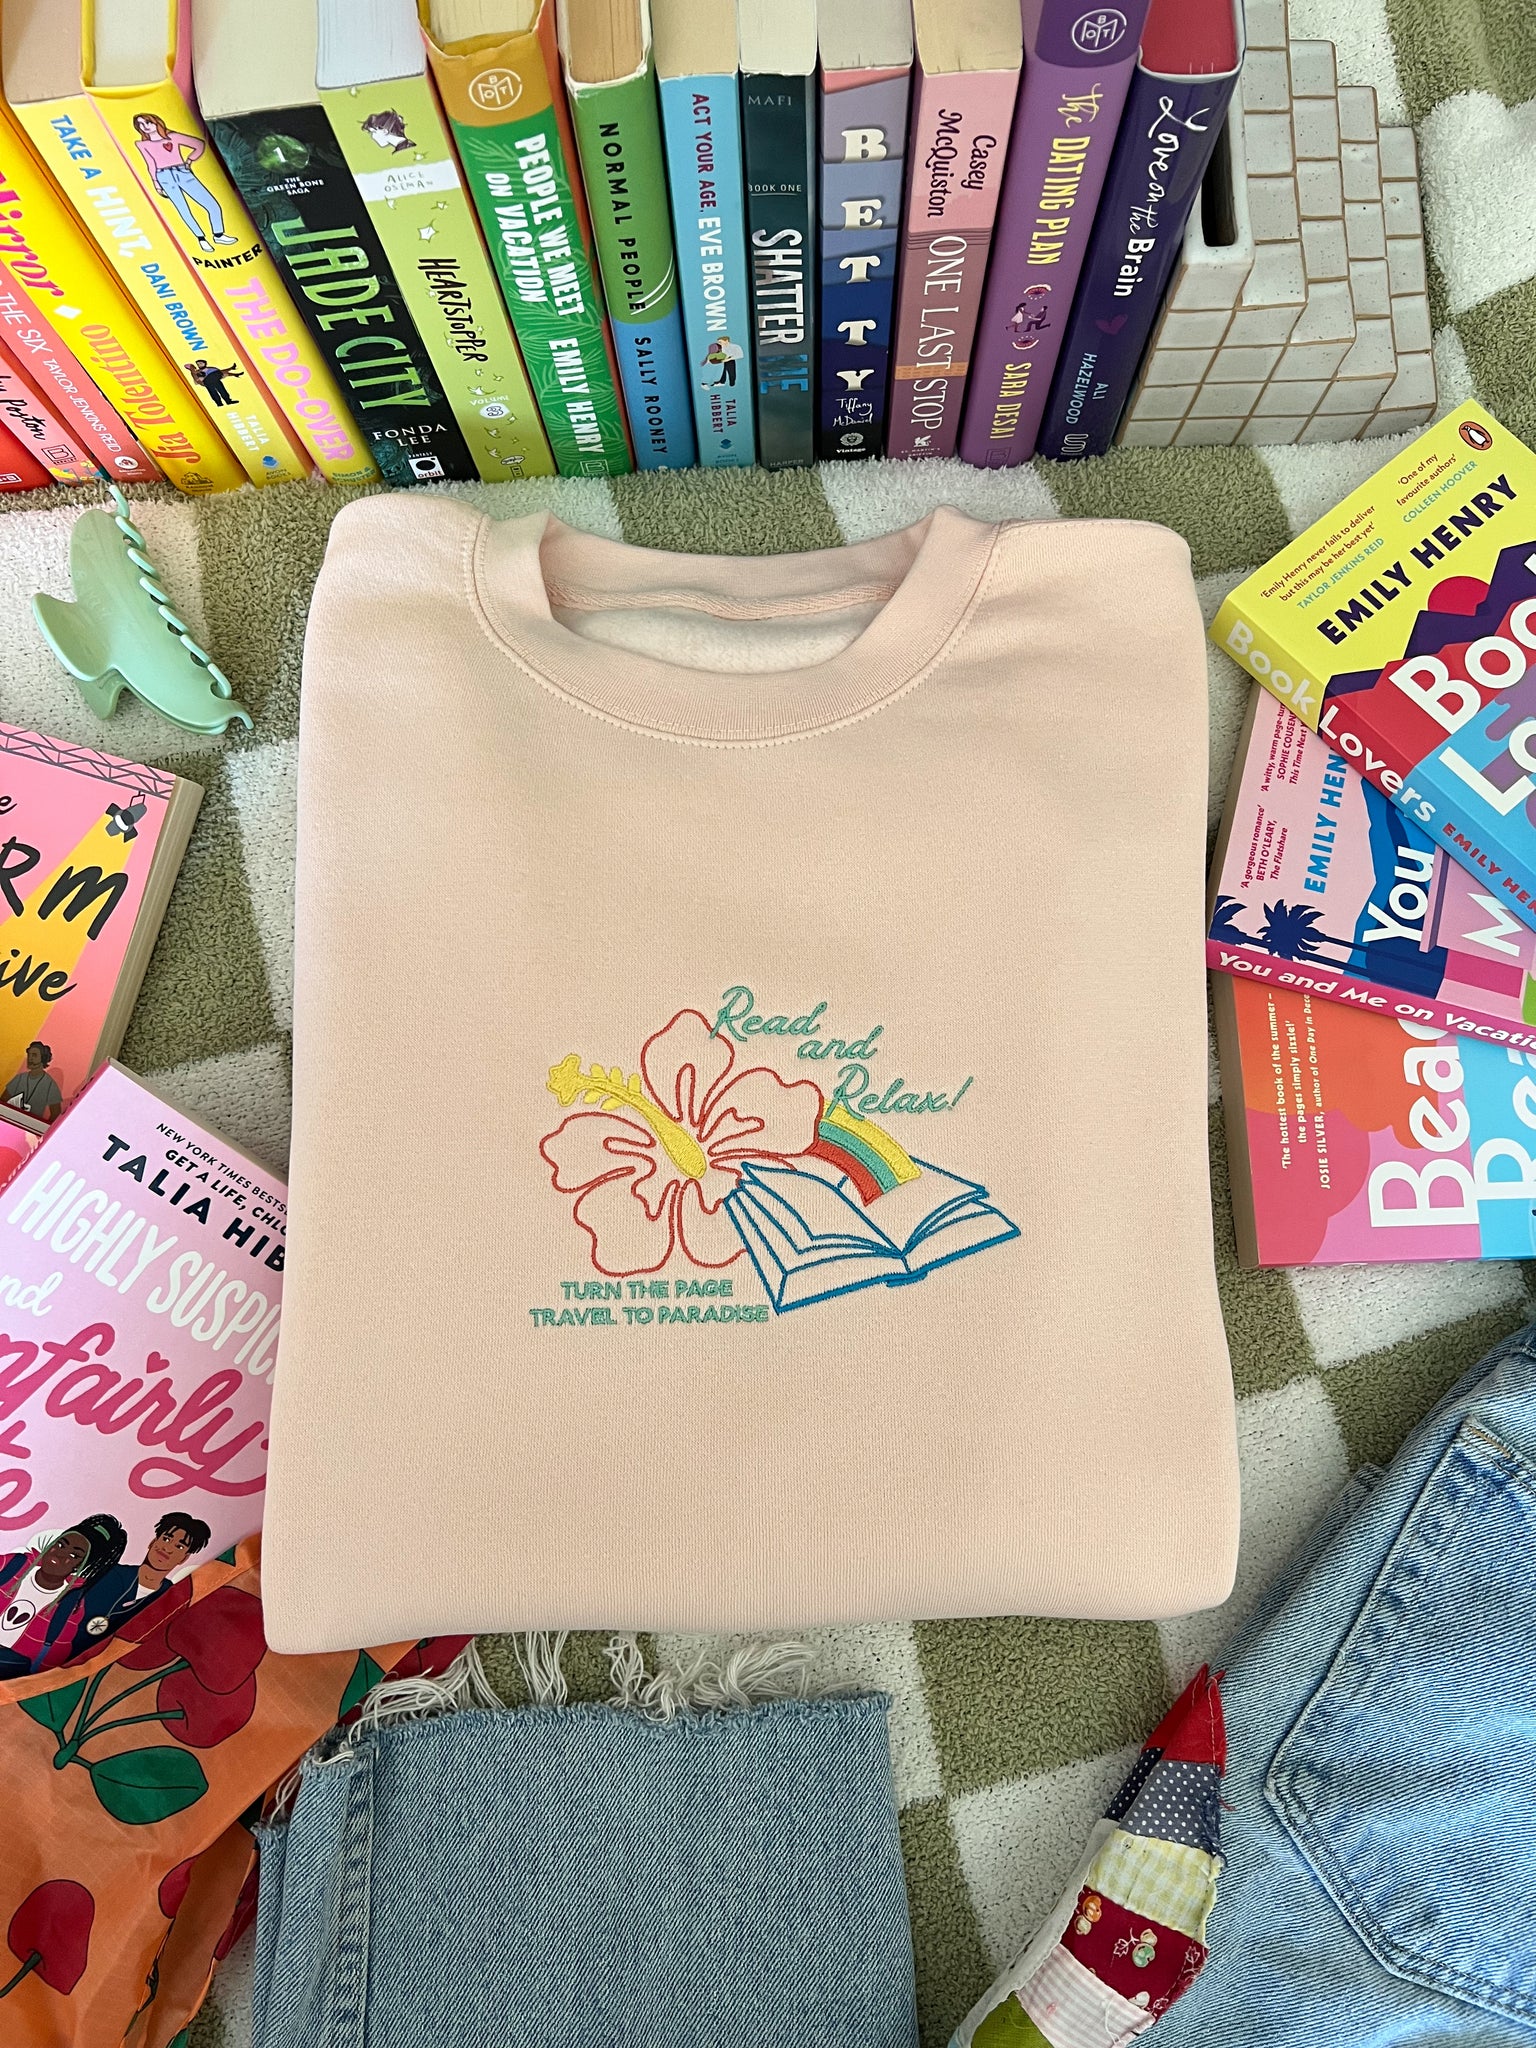 Read and Relax Embroidered Crewneck